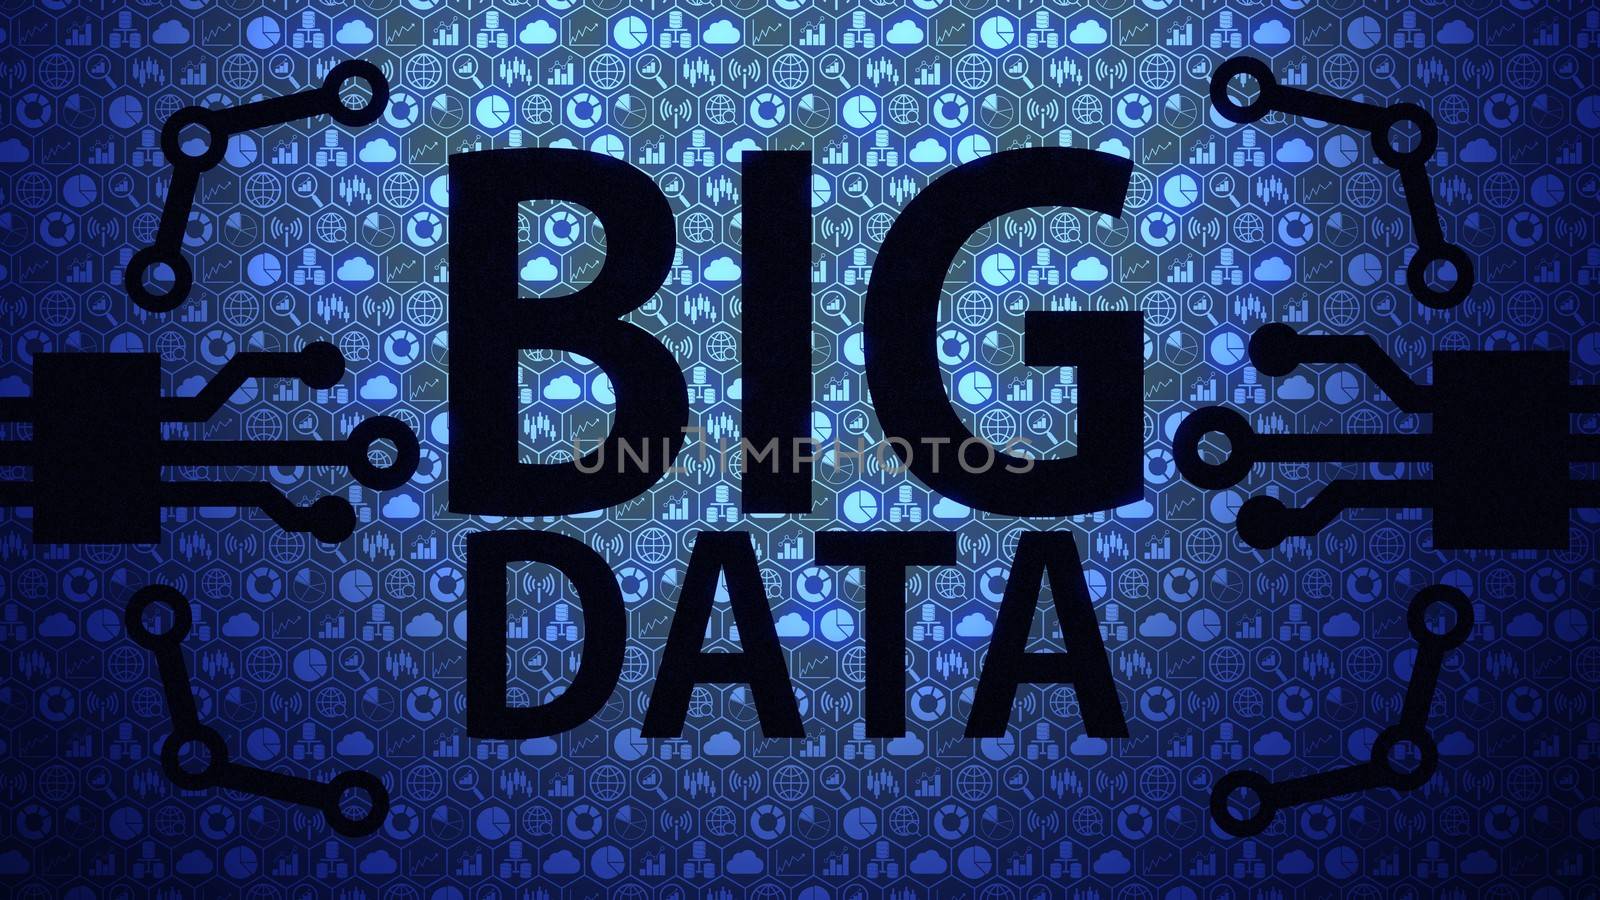 Big Data Big Picture Background Composed of Big Data Icons and Big Data Text with Blue Light Ver.1 of 4 (Full Screen) by ariya23156